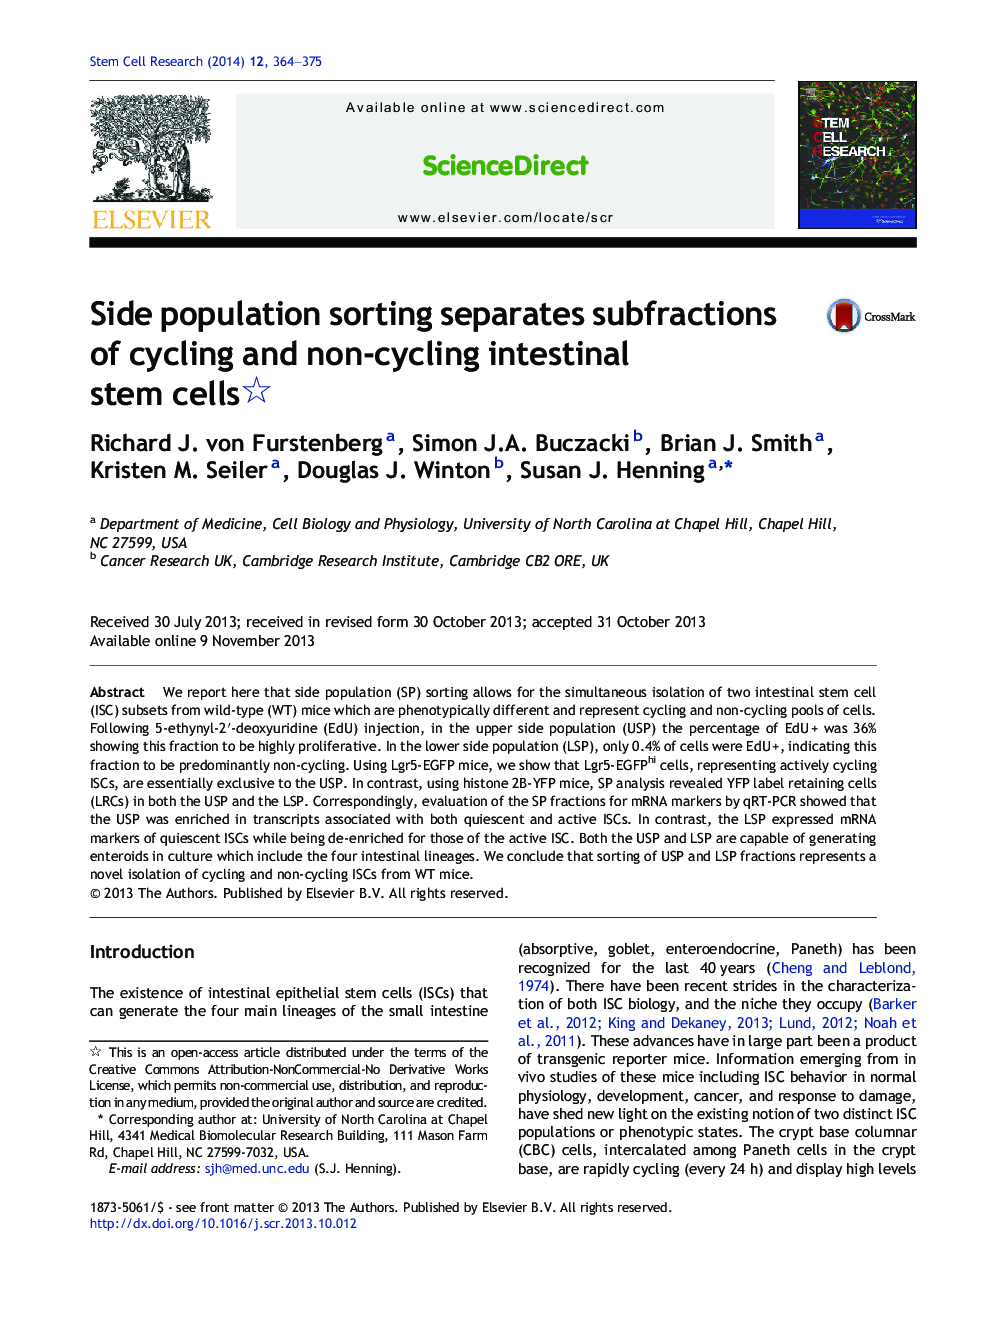 Side population sorting separates subfractions of cycling and non-cycling intestinal stem cells 